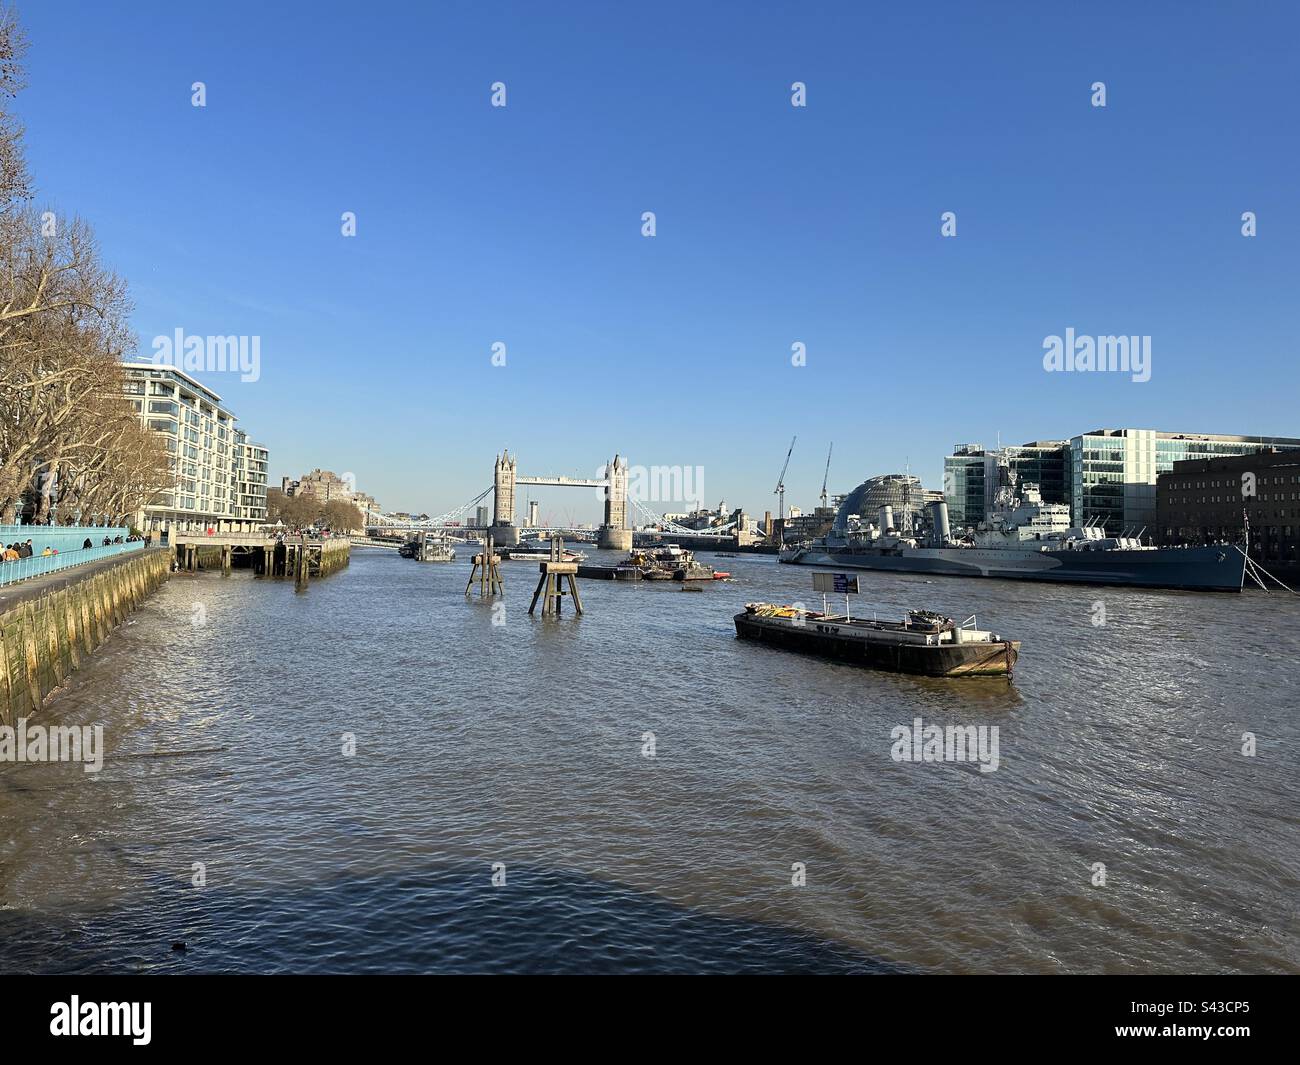 Tower Bridge and River Thames with moored boats and city buildings on north and south banks of the river, London, England Stock Photo